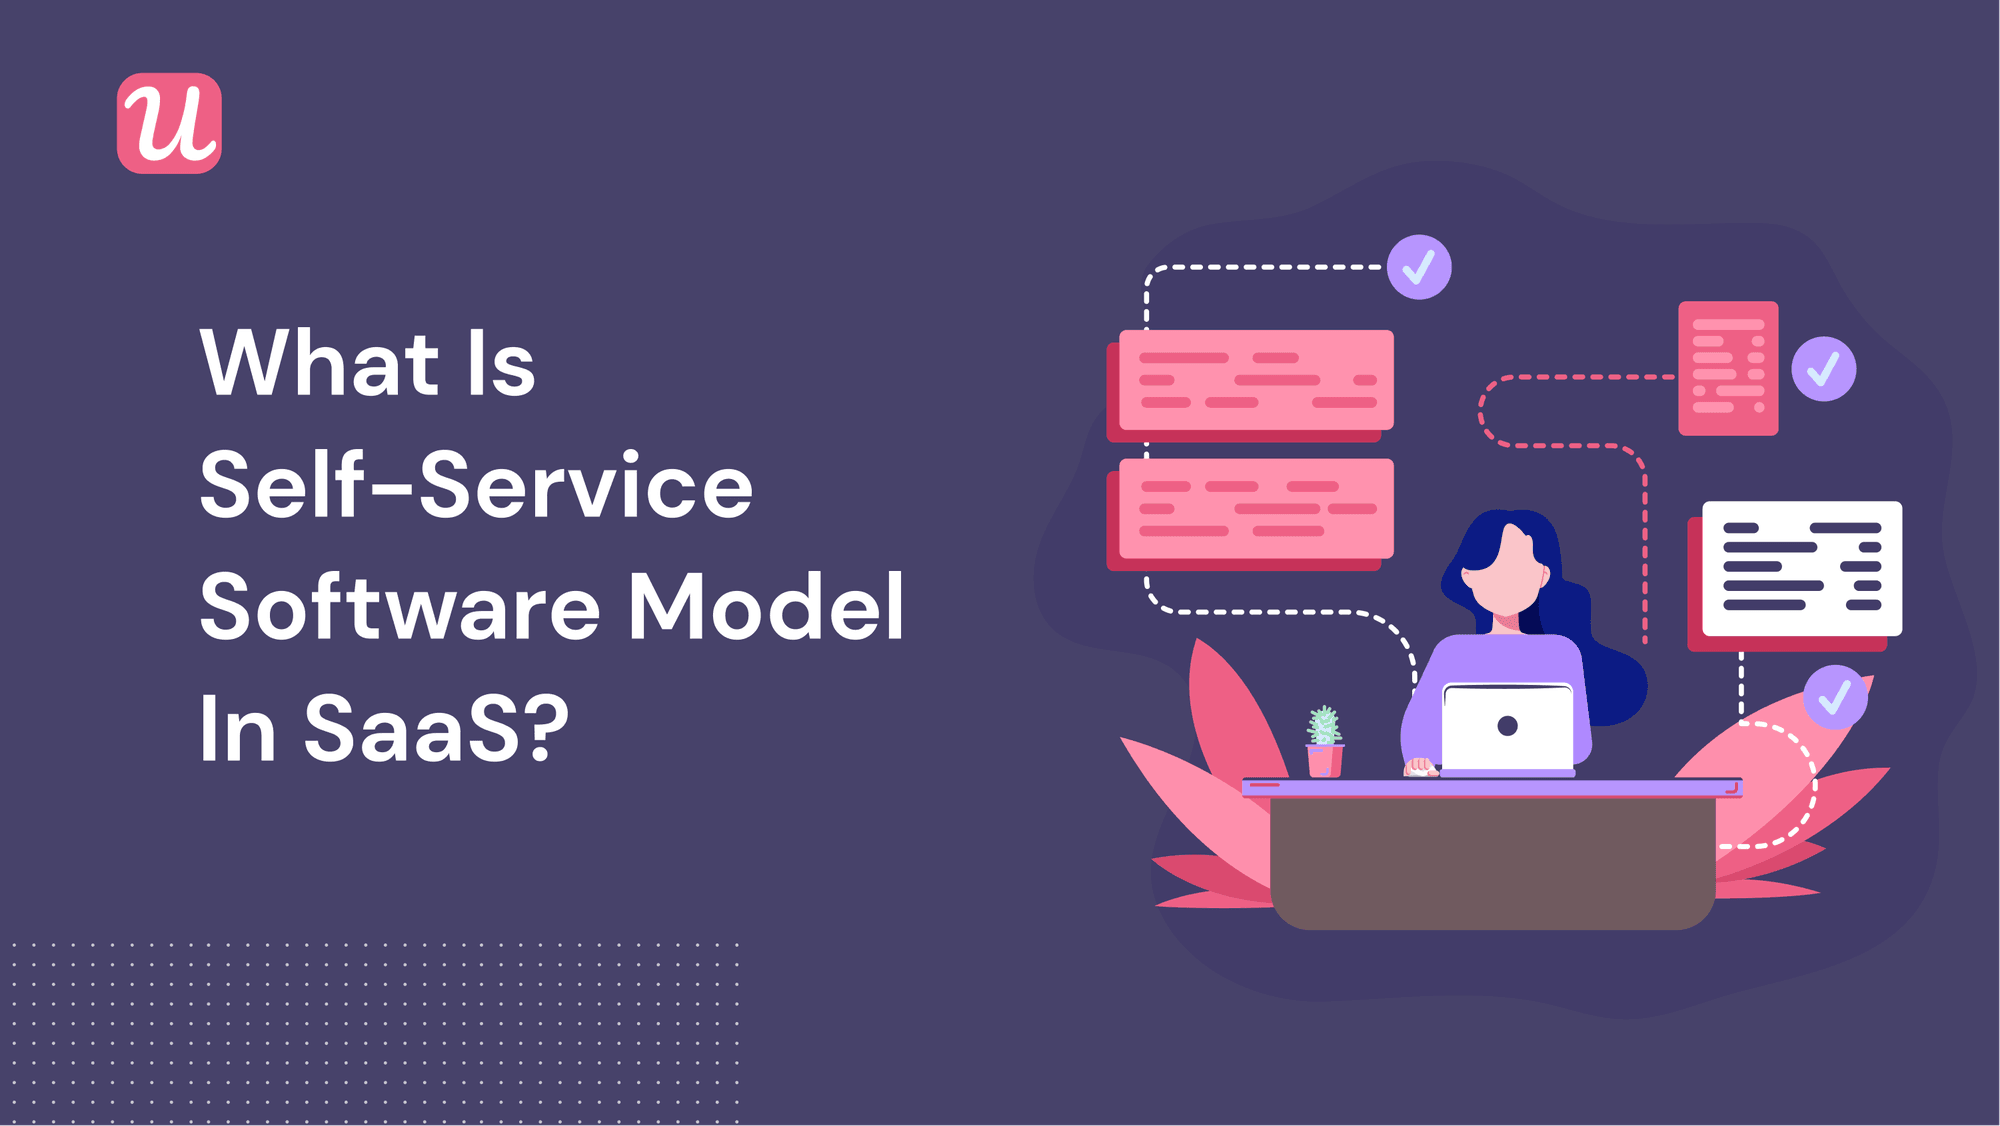 What Is The Self-Service Software Model In SaaS?